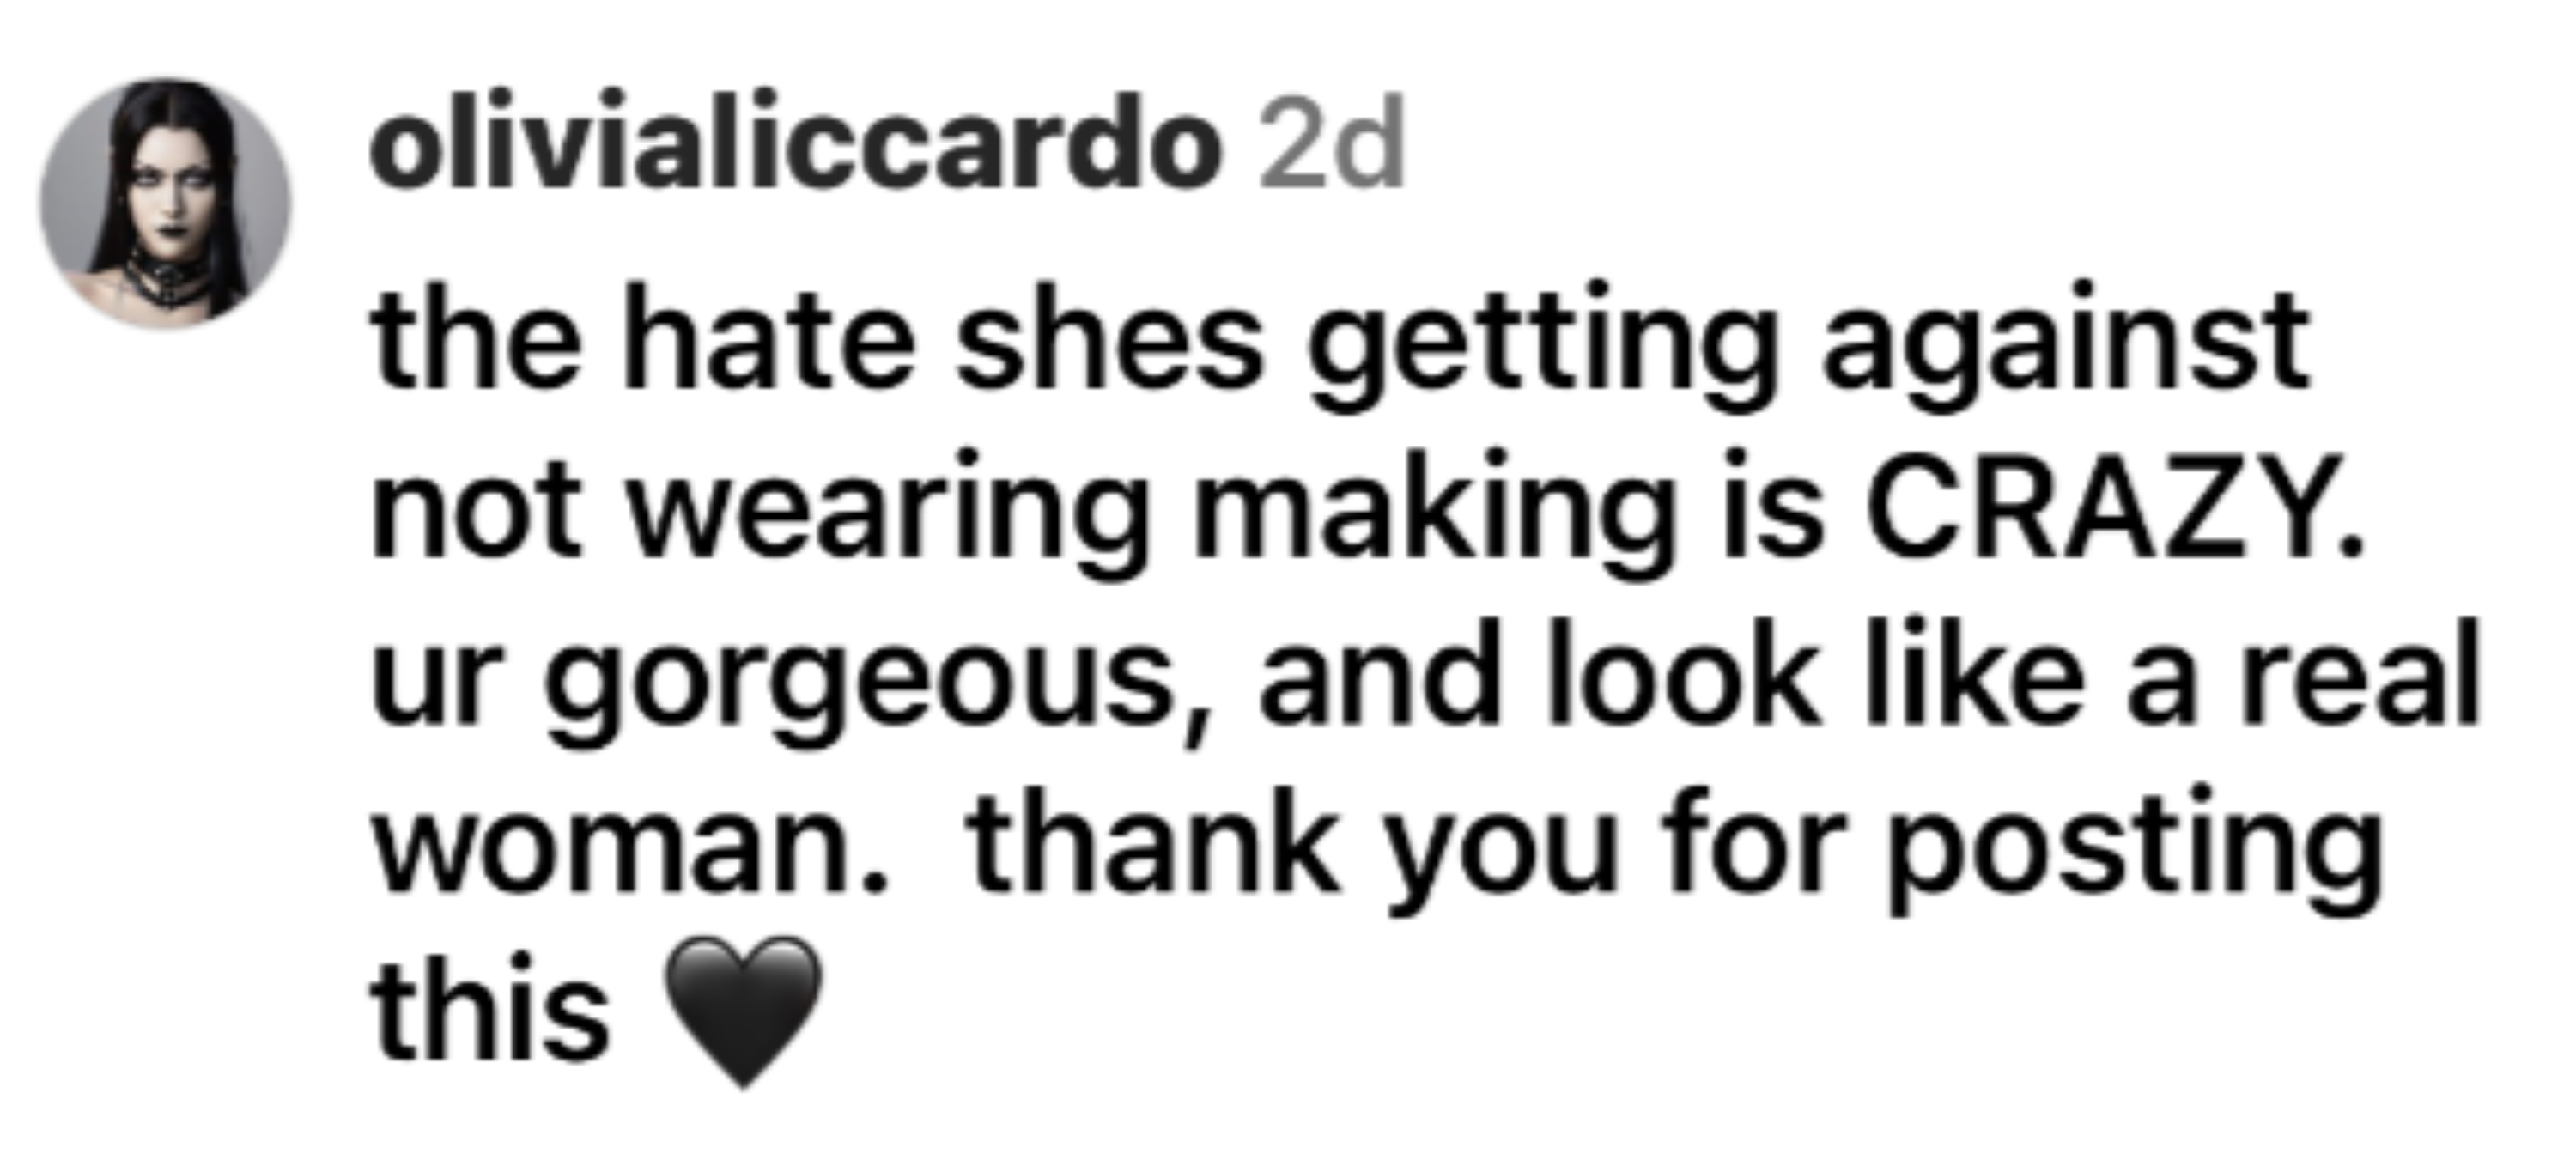 Comment from user oliviaiccardo supporting Megan for not wearing makeup and calling her gorgeous and a real woman